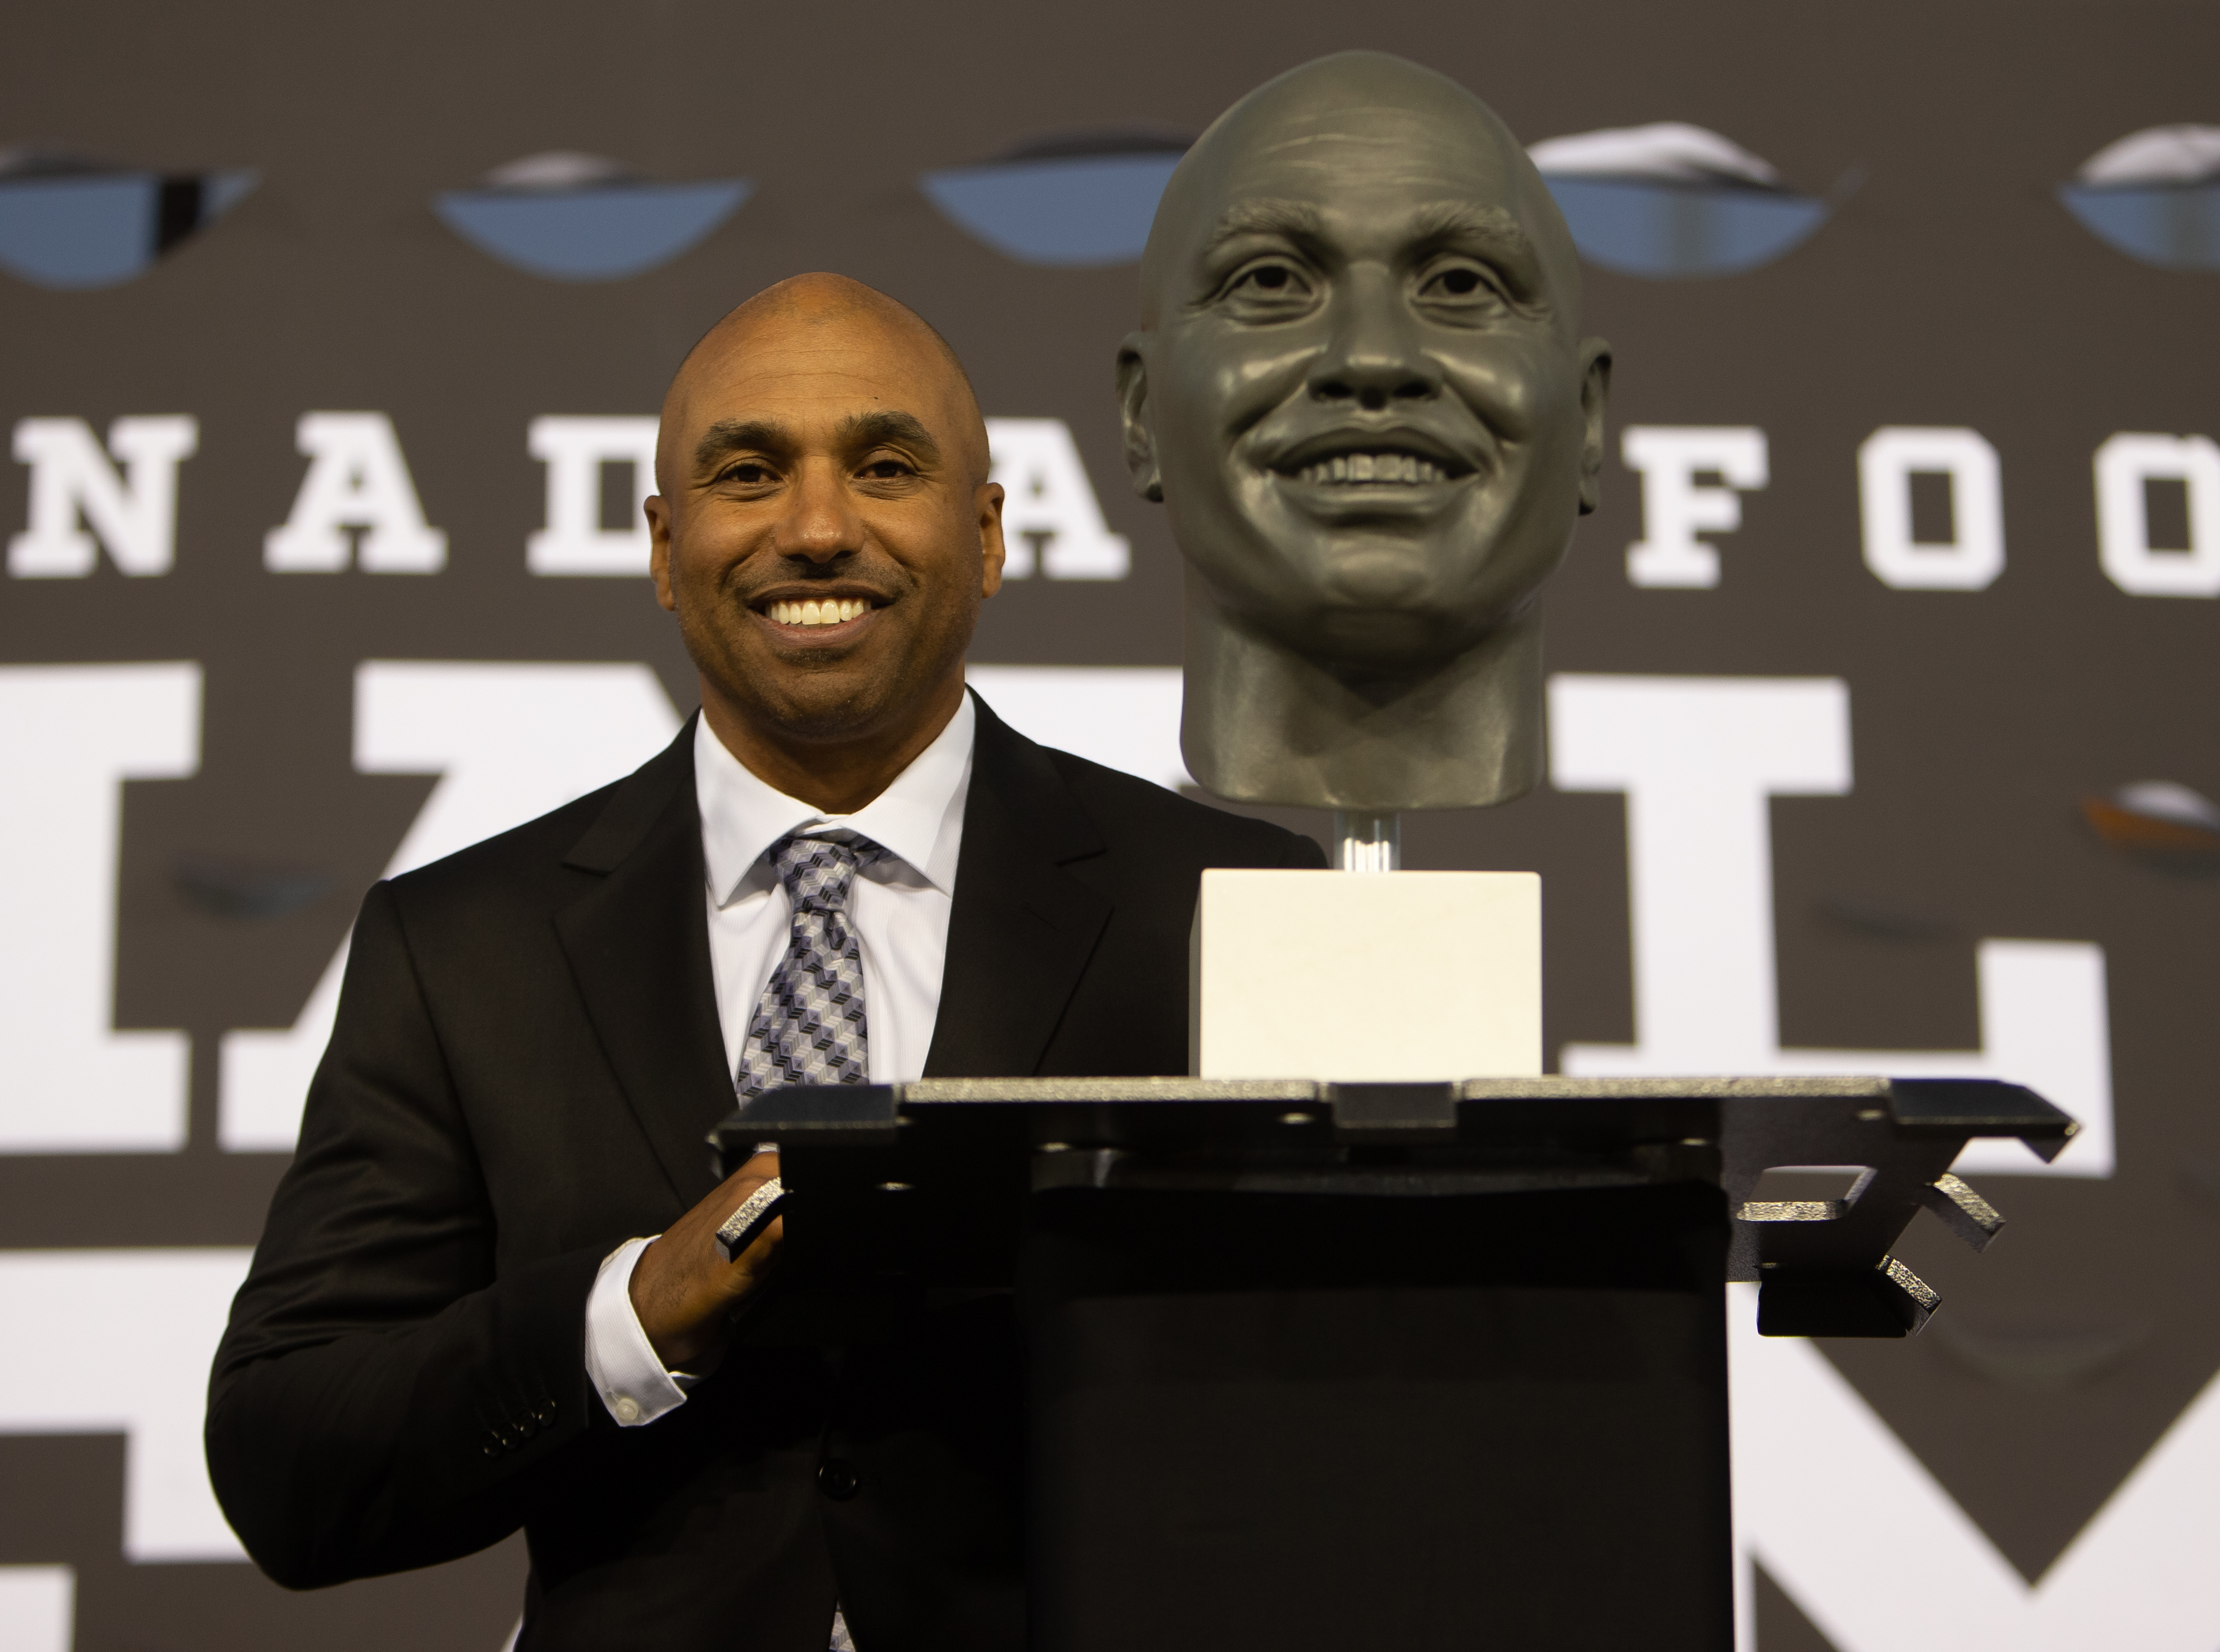 Orlondo Steinauer stands at a podium, smiling, next to a bust of himself